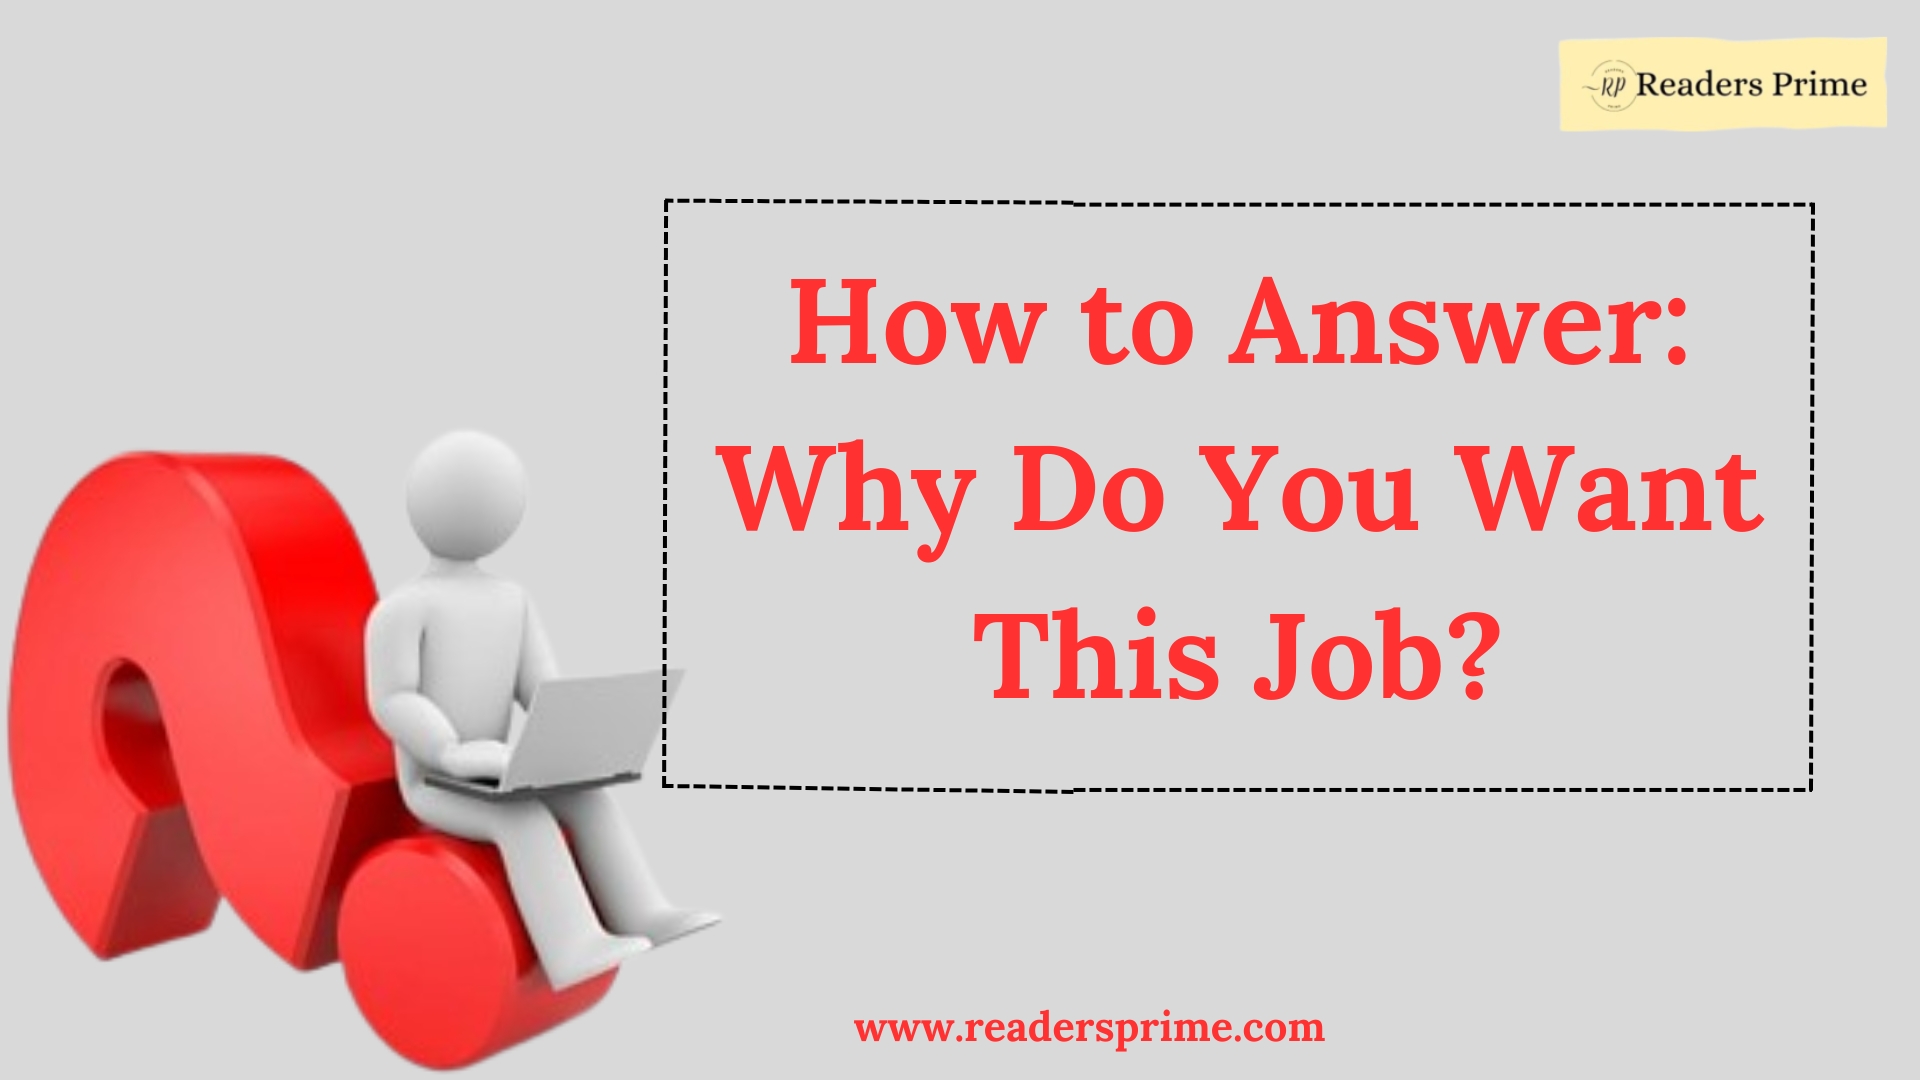 <strong>How to Answer: Why Do You Want This Job?</strong>